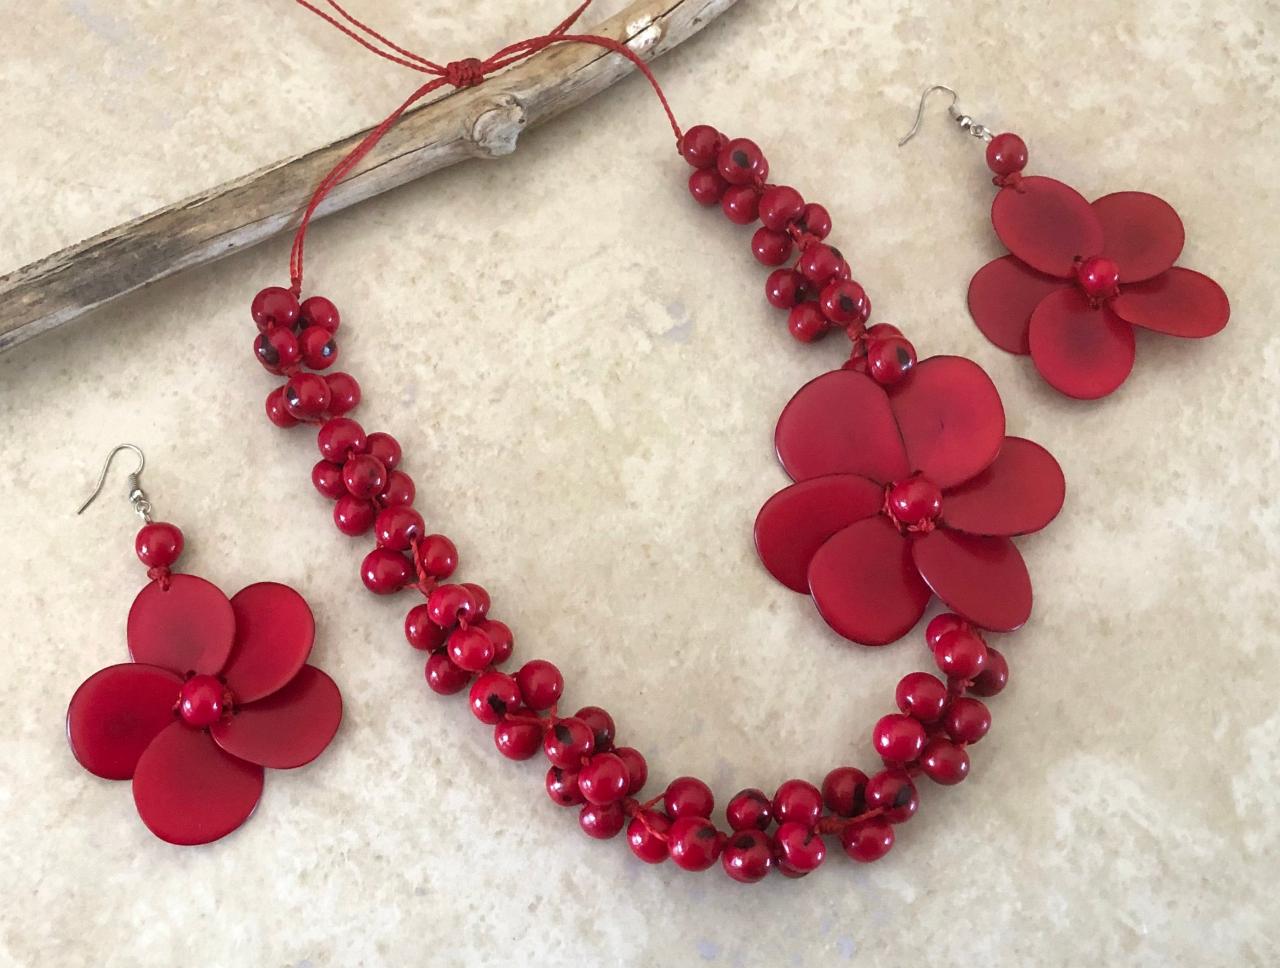 ! Red Tagua Nut Necklace And Earrings, Acai Seeds Necklace, Statement Necklace, Strand Necklace, Handmade Neck,vegan Necklace, Exotic